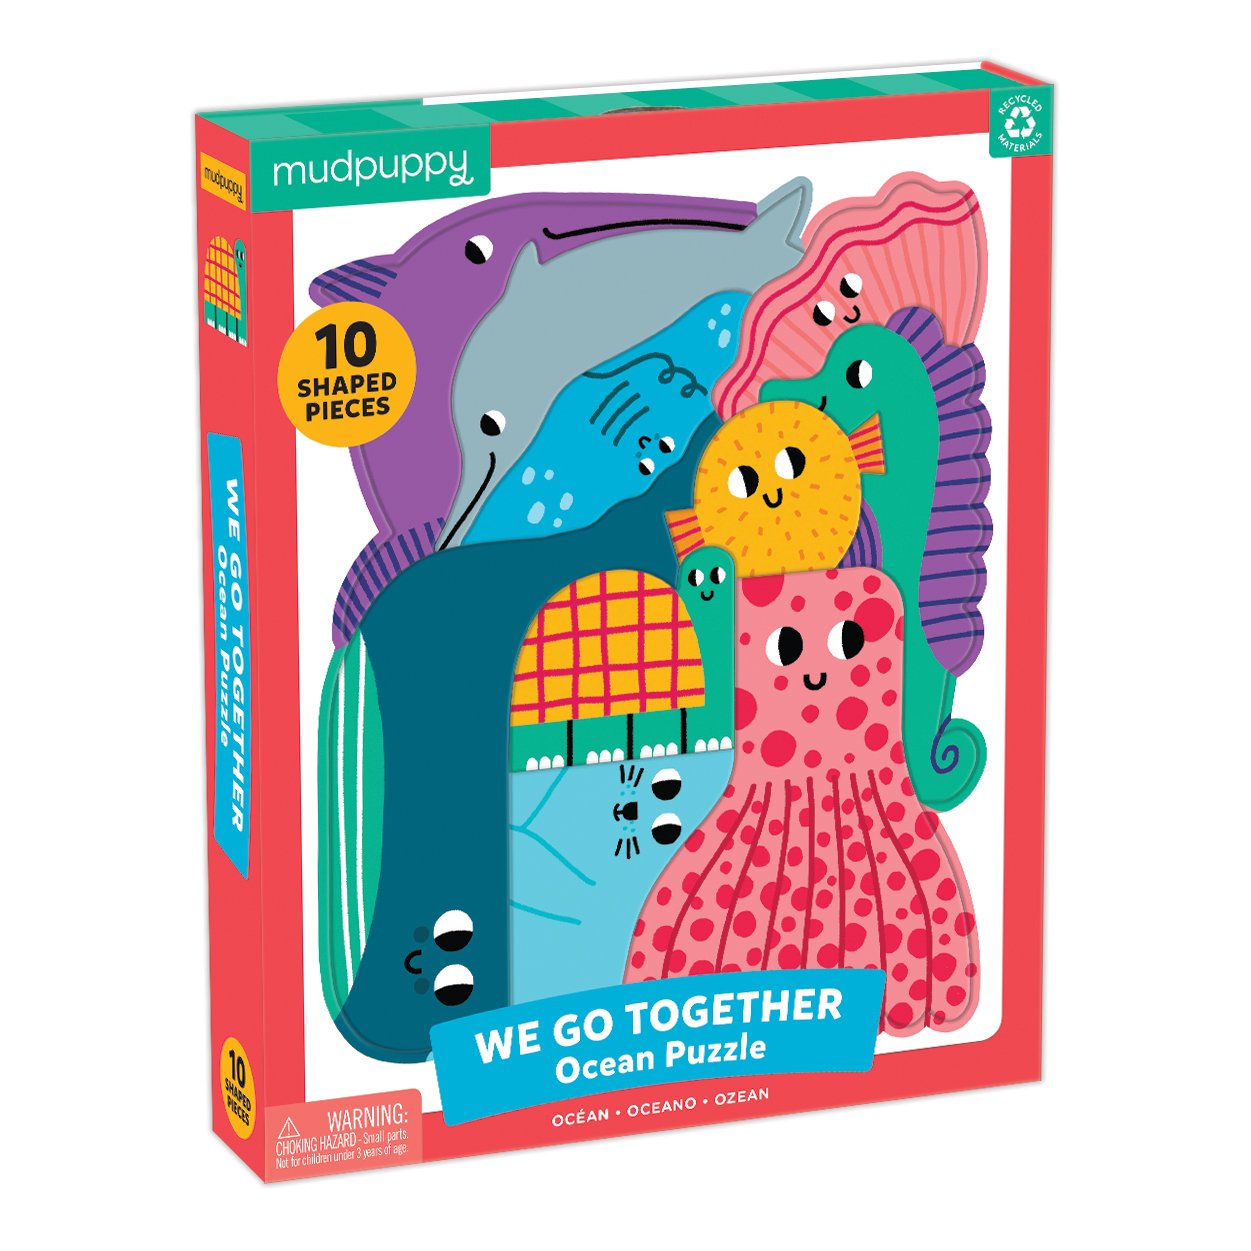 We Go Together Ocean Puzzle